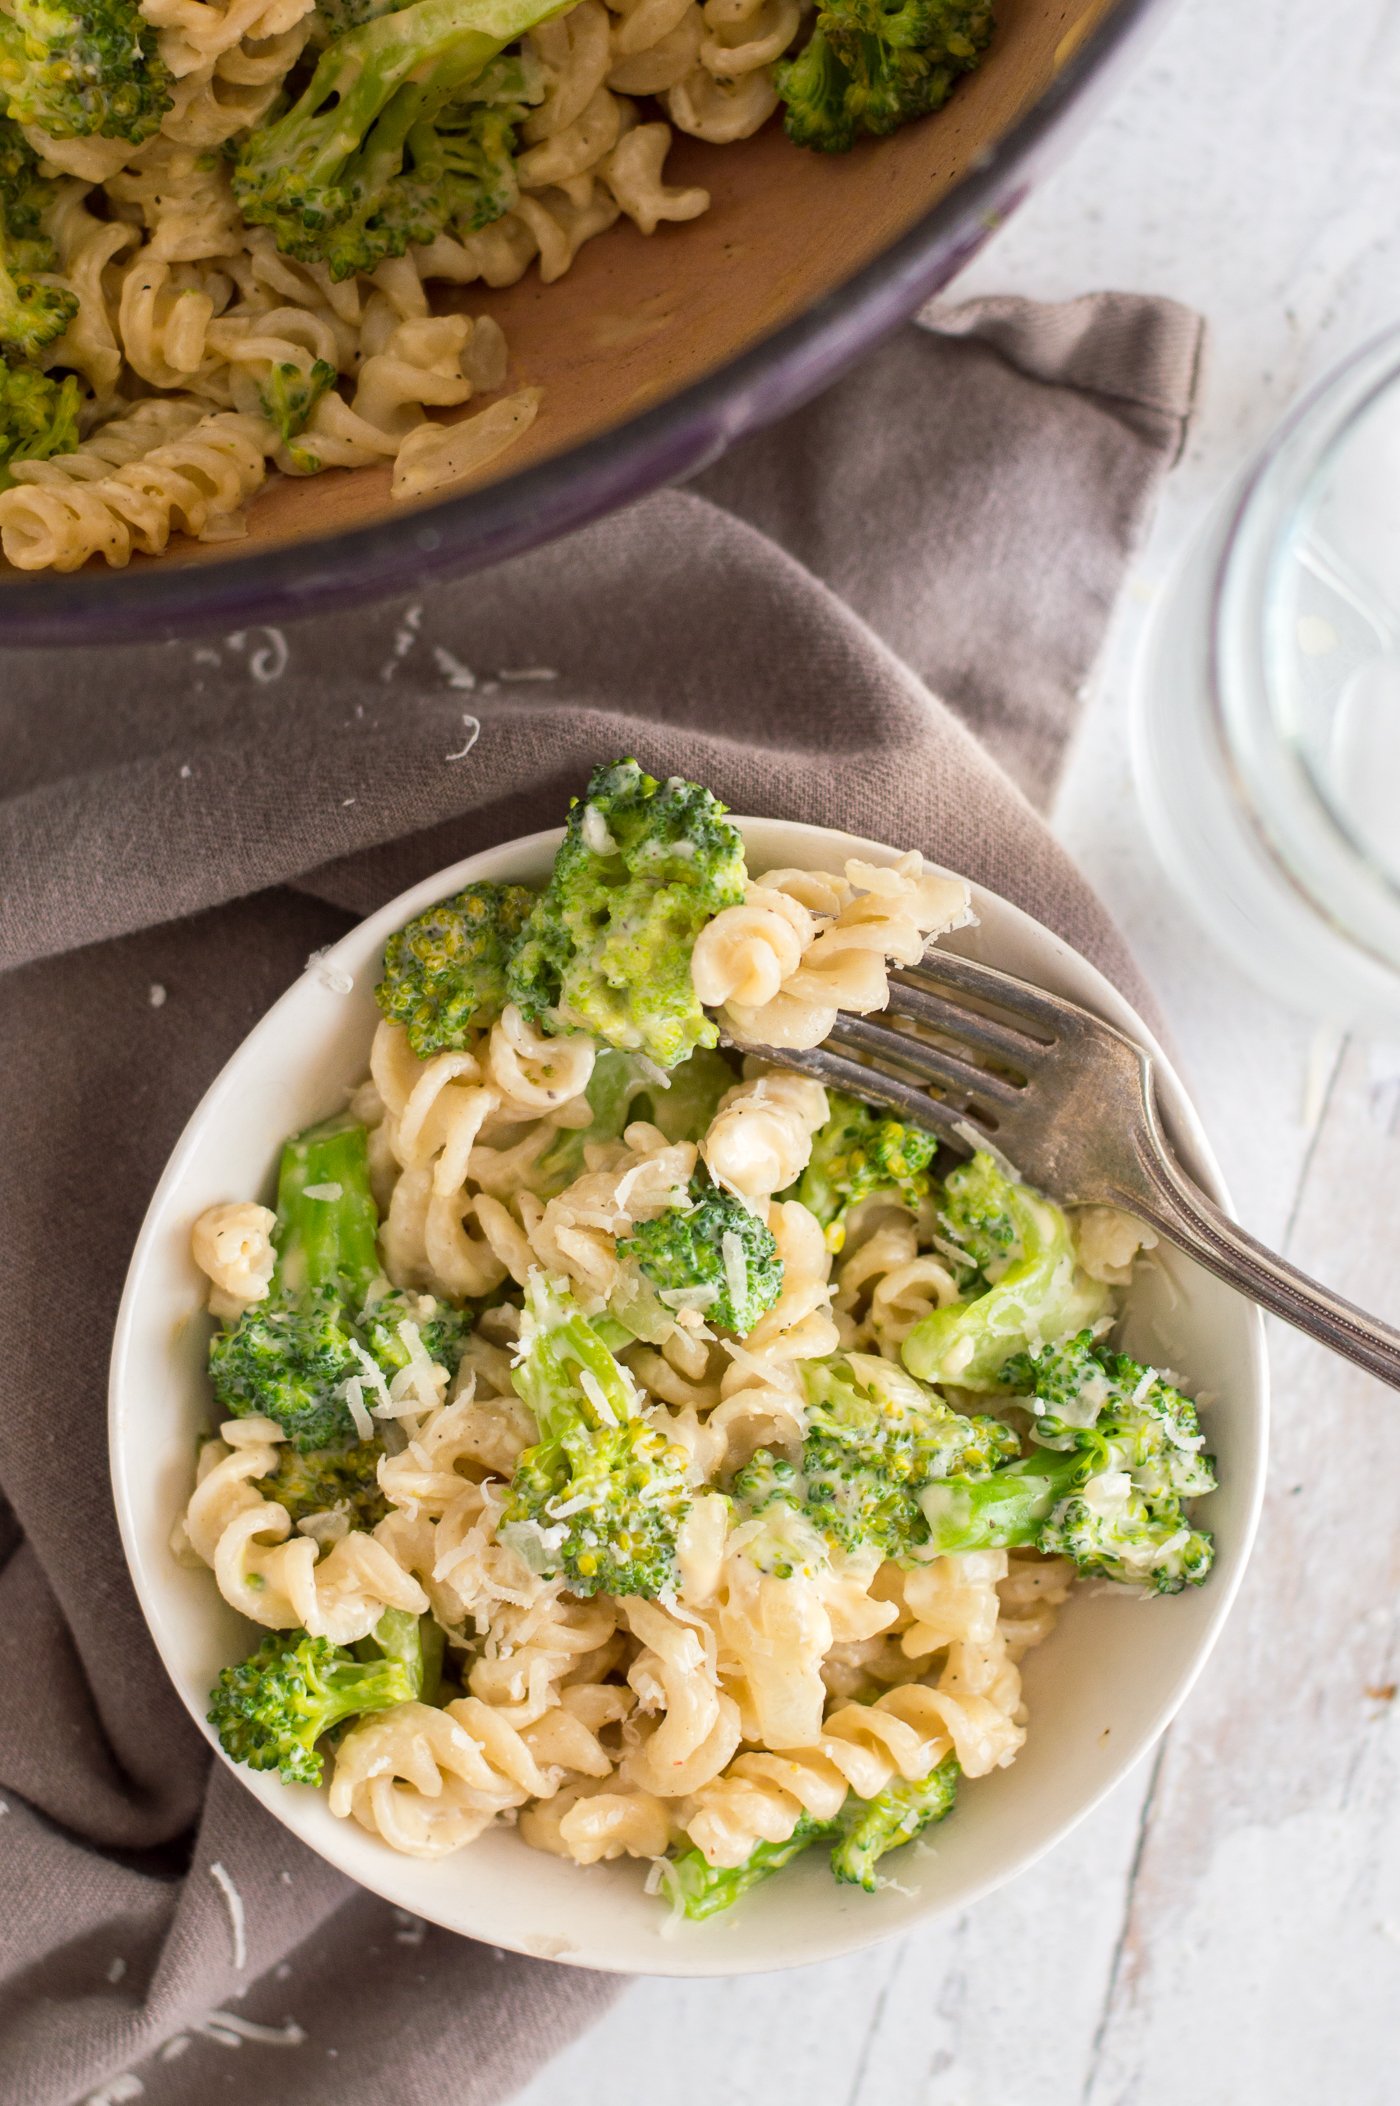 Creamy broccoli pasta in a bowl with a fork on a table with gray napkin.